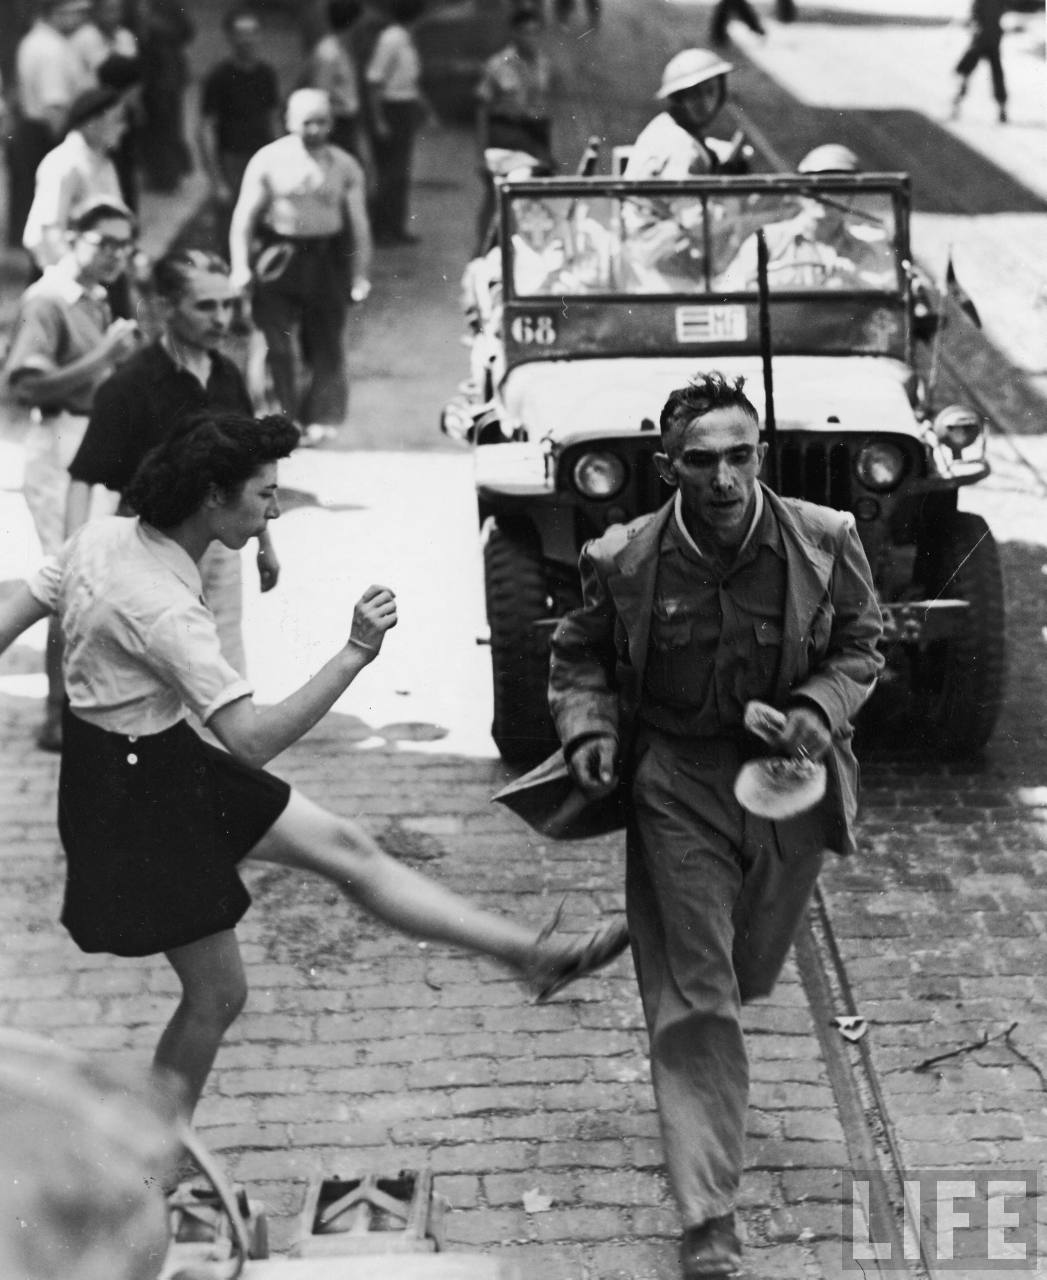 French girl vents anger by kicking at a passing German prisoner on his way to confinement after being captured. September 26, 1944